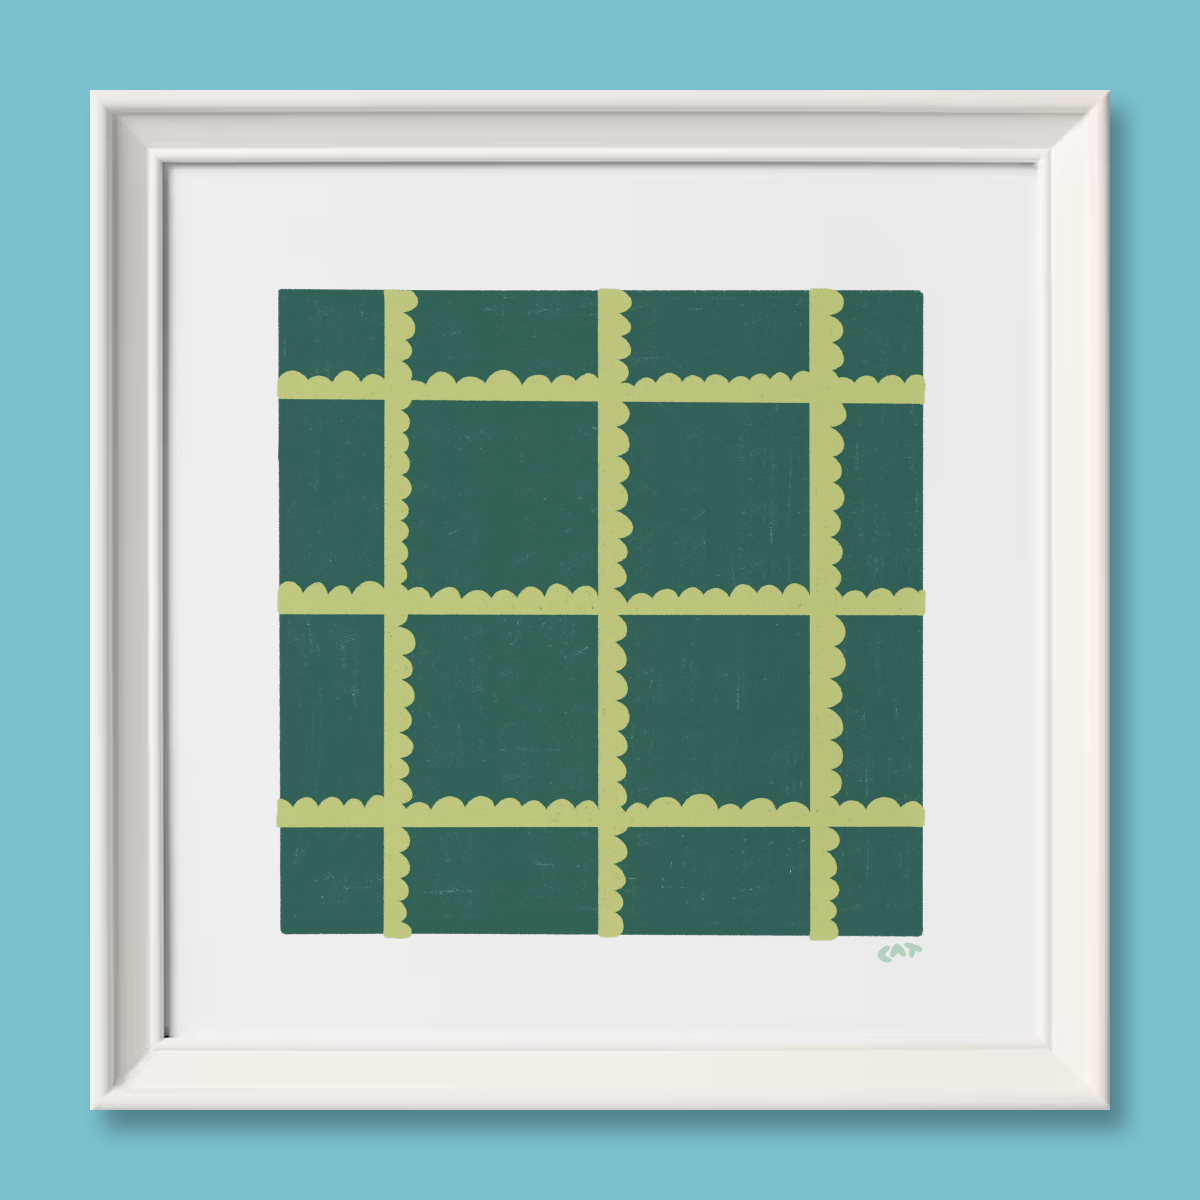 White framed print of a dark green square with light green ruffles arranged in a grid.